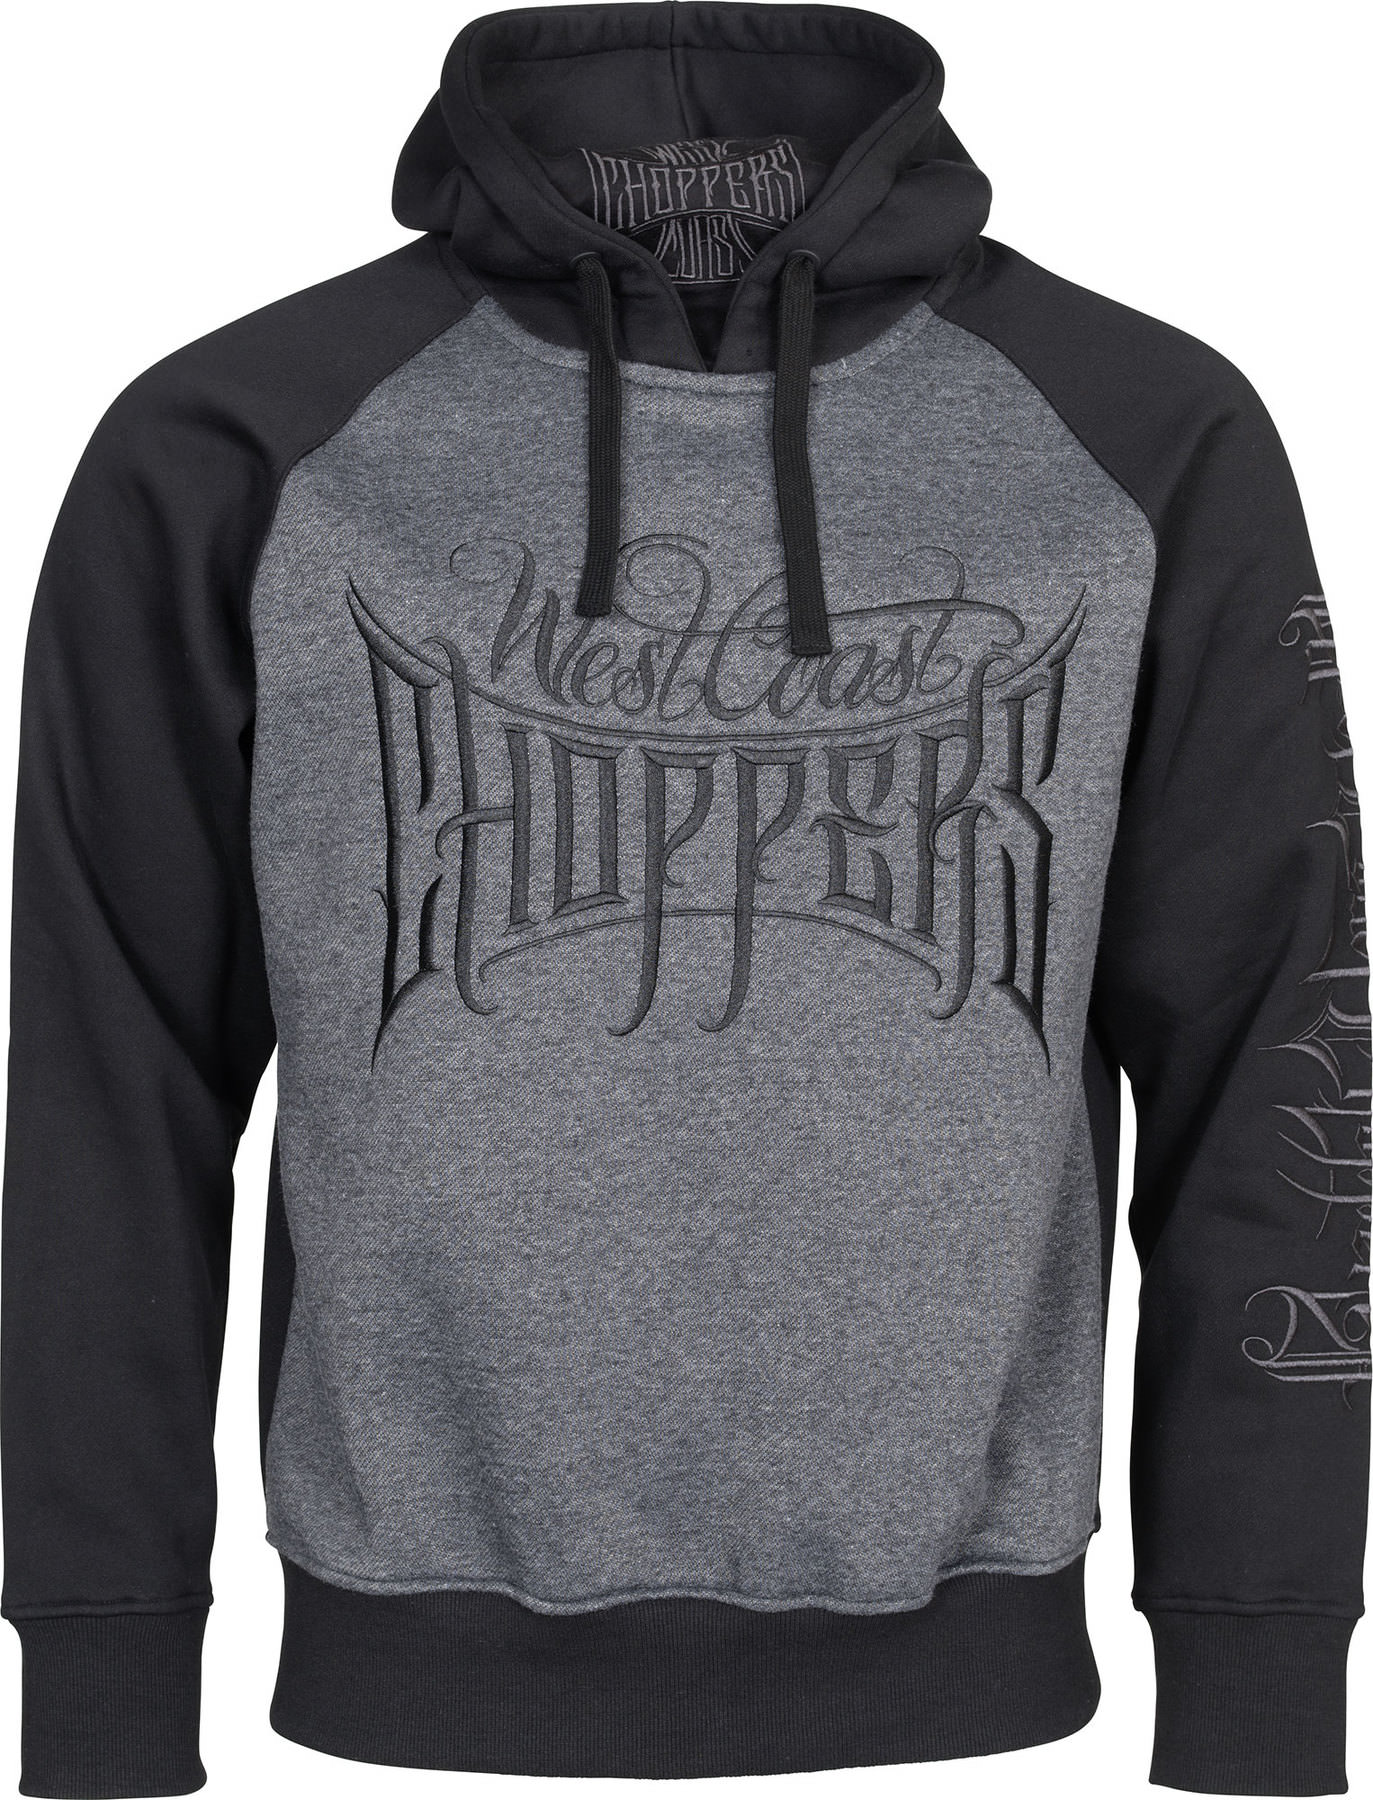 Buy West Coast Choppers Mouthpiece hoodie | Louis motorcycle clothing and technology